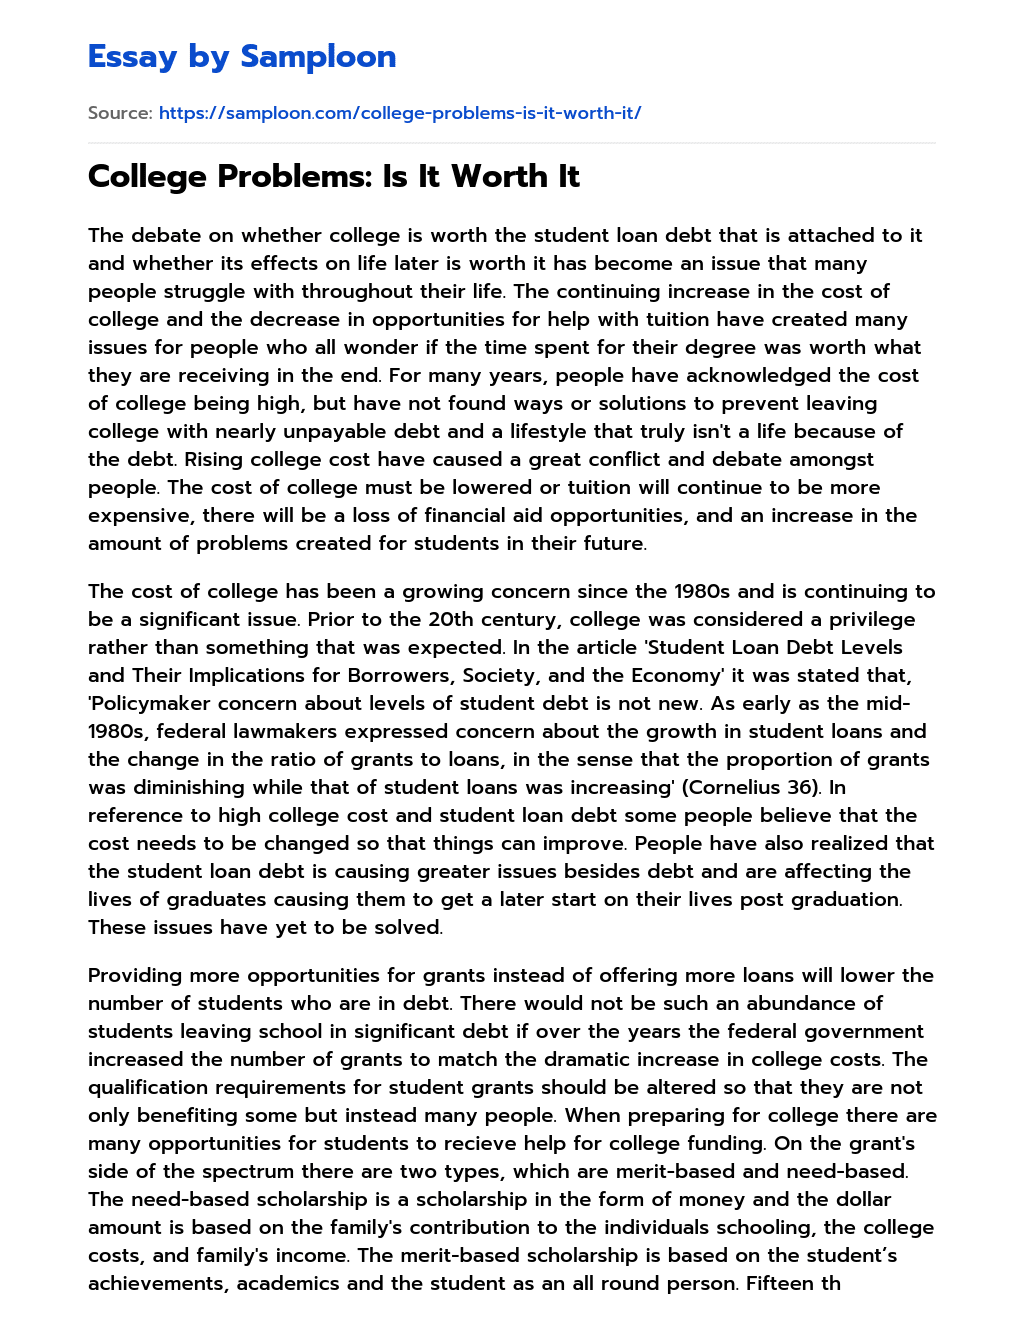 College Problems: Is It Worth It essay